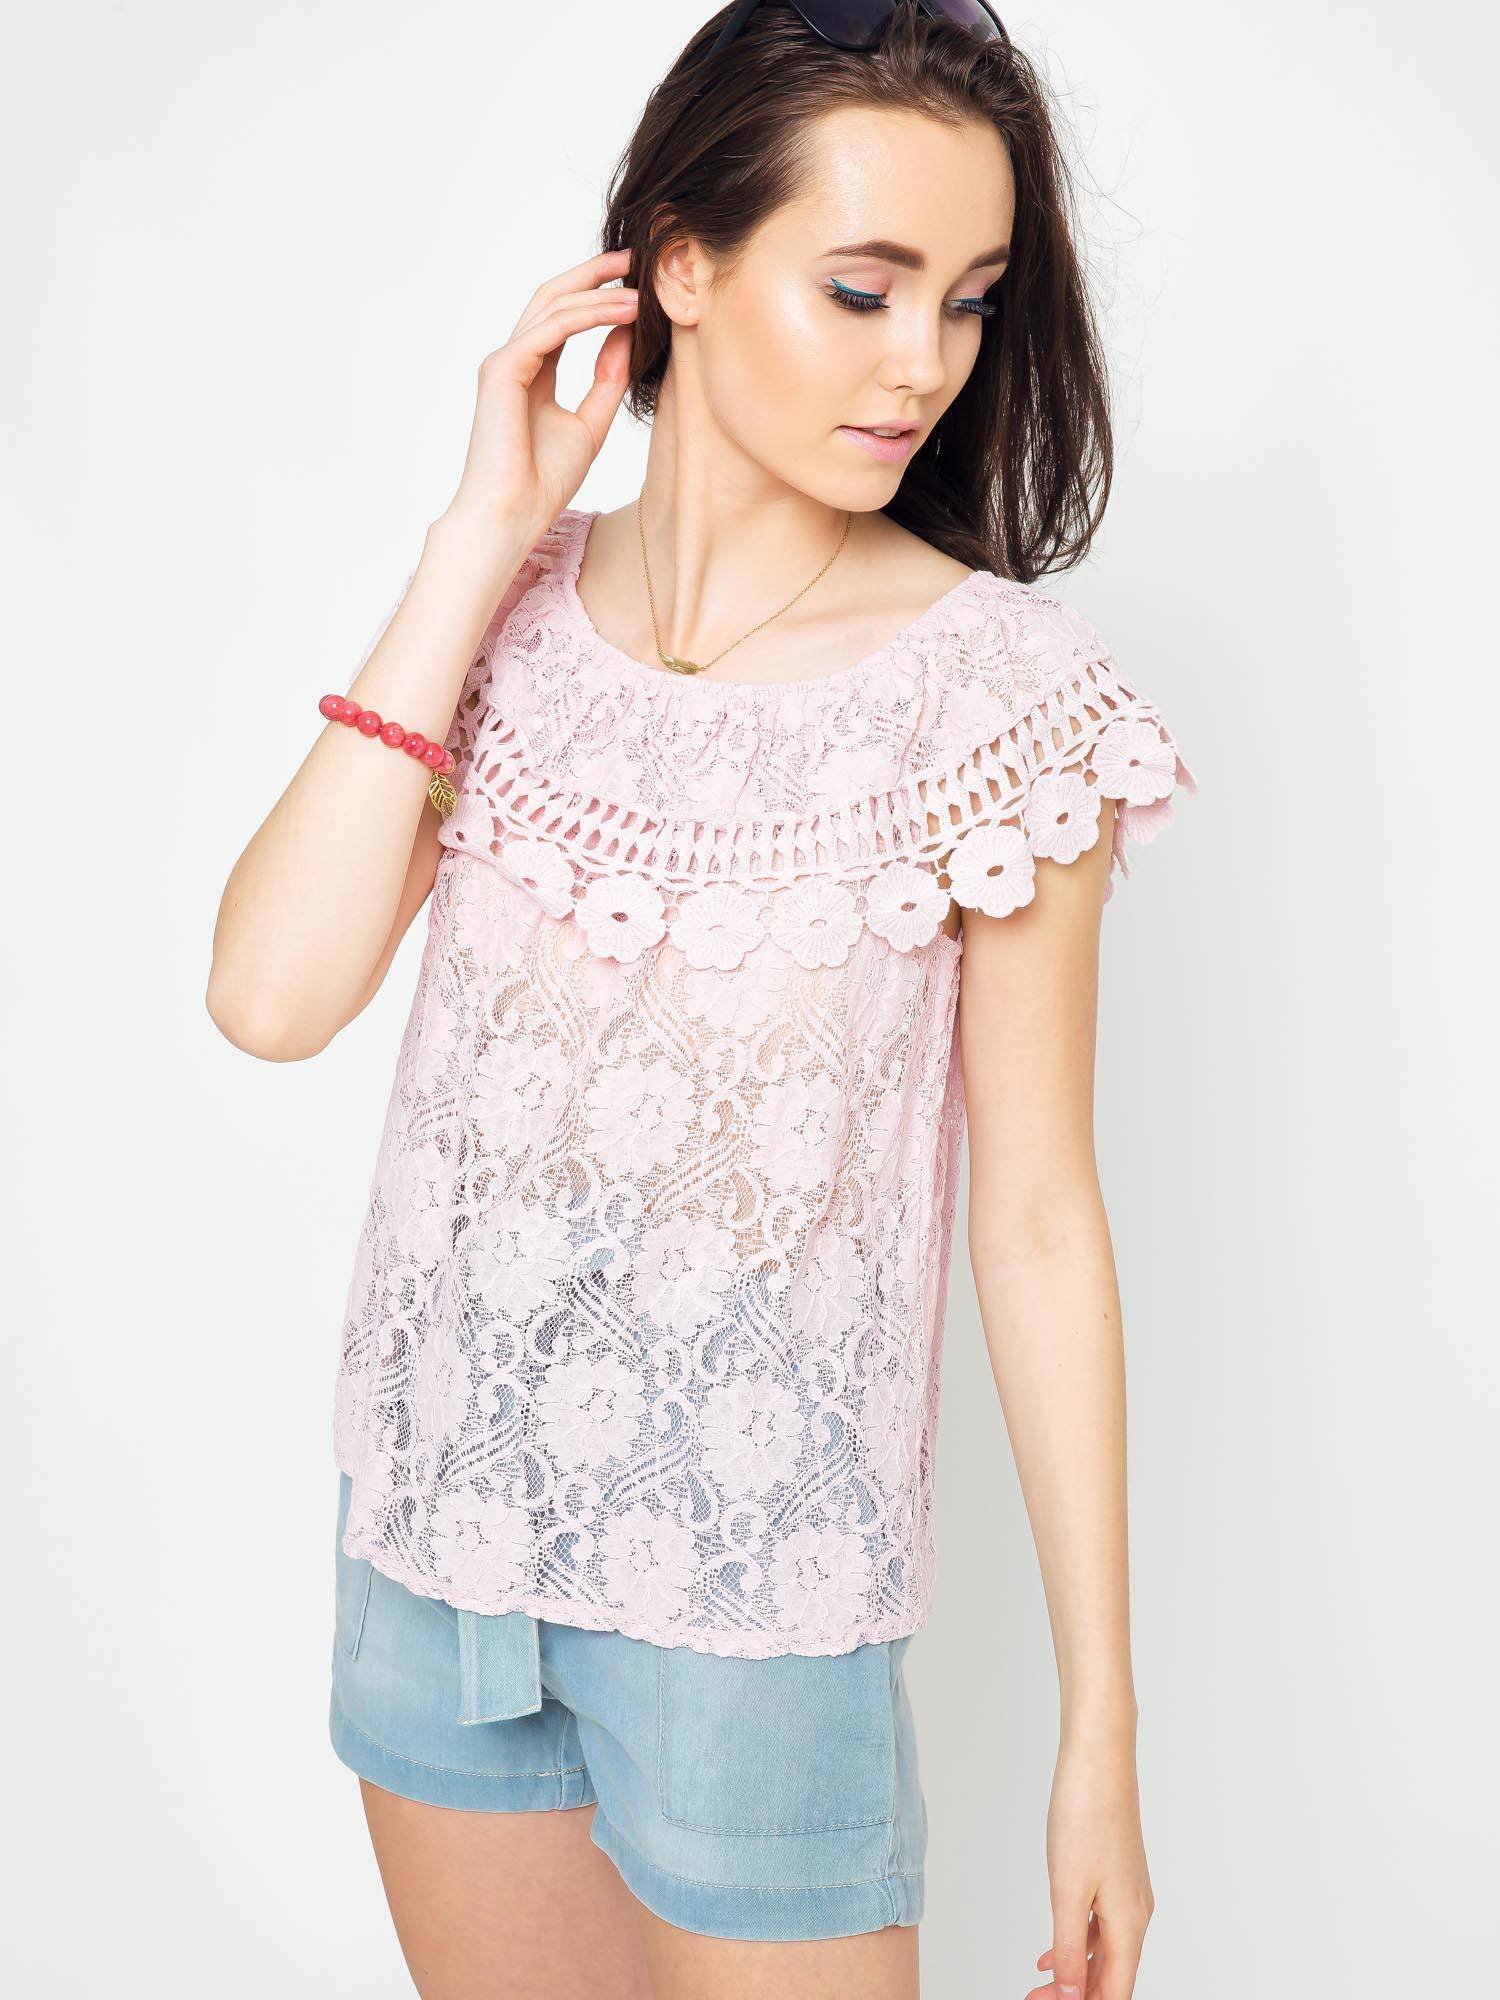 Lace blouse with Spanish neckline pink